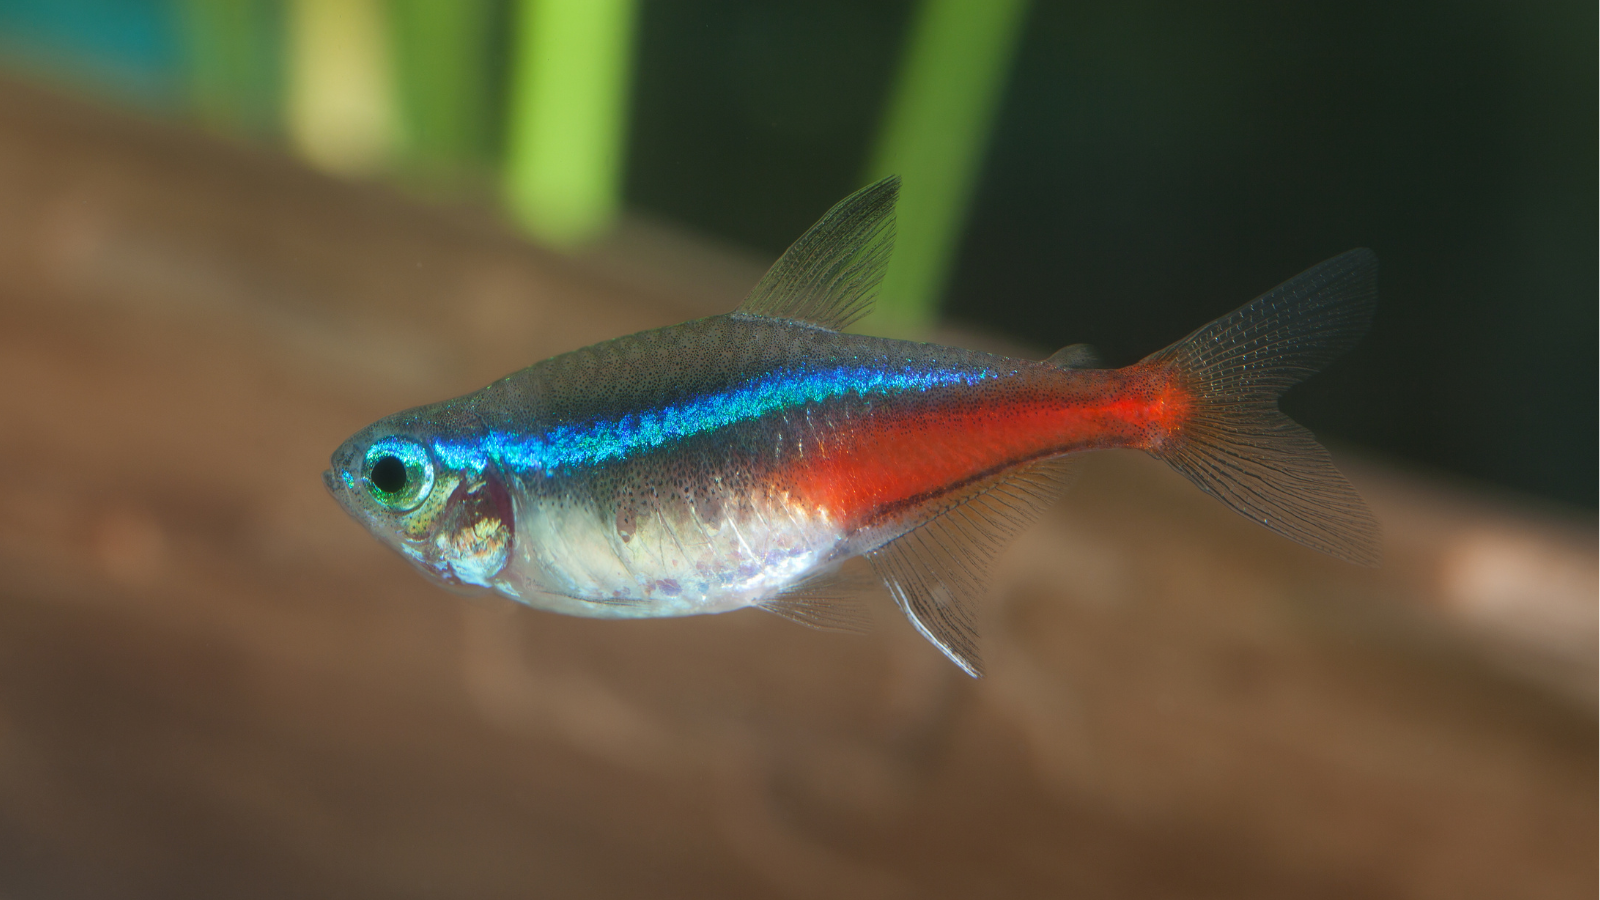 Neon Tetra are beautiful little fish that will brighten up even the darkest of blackwater aquariums.